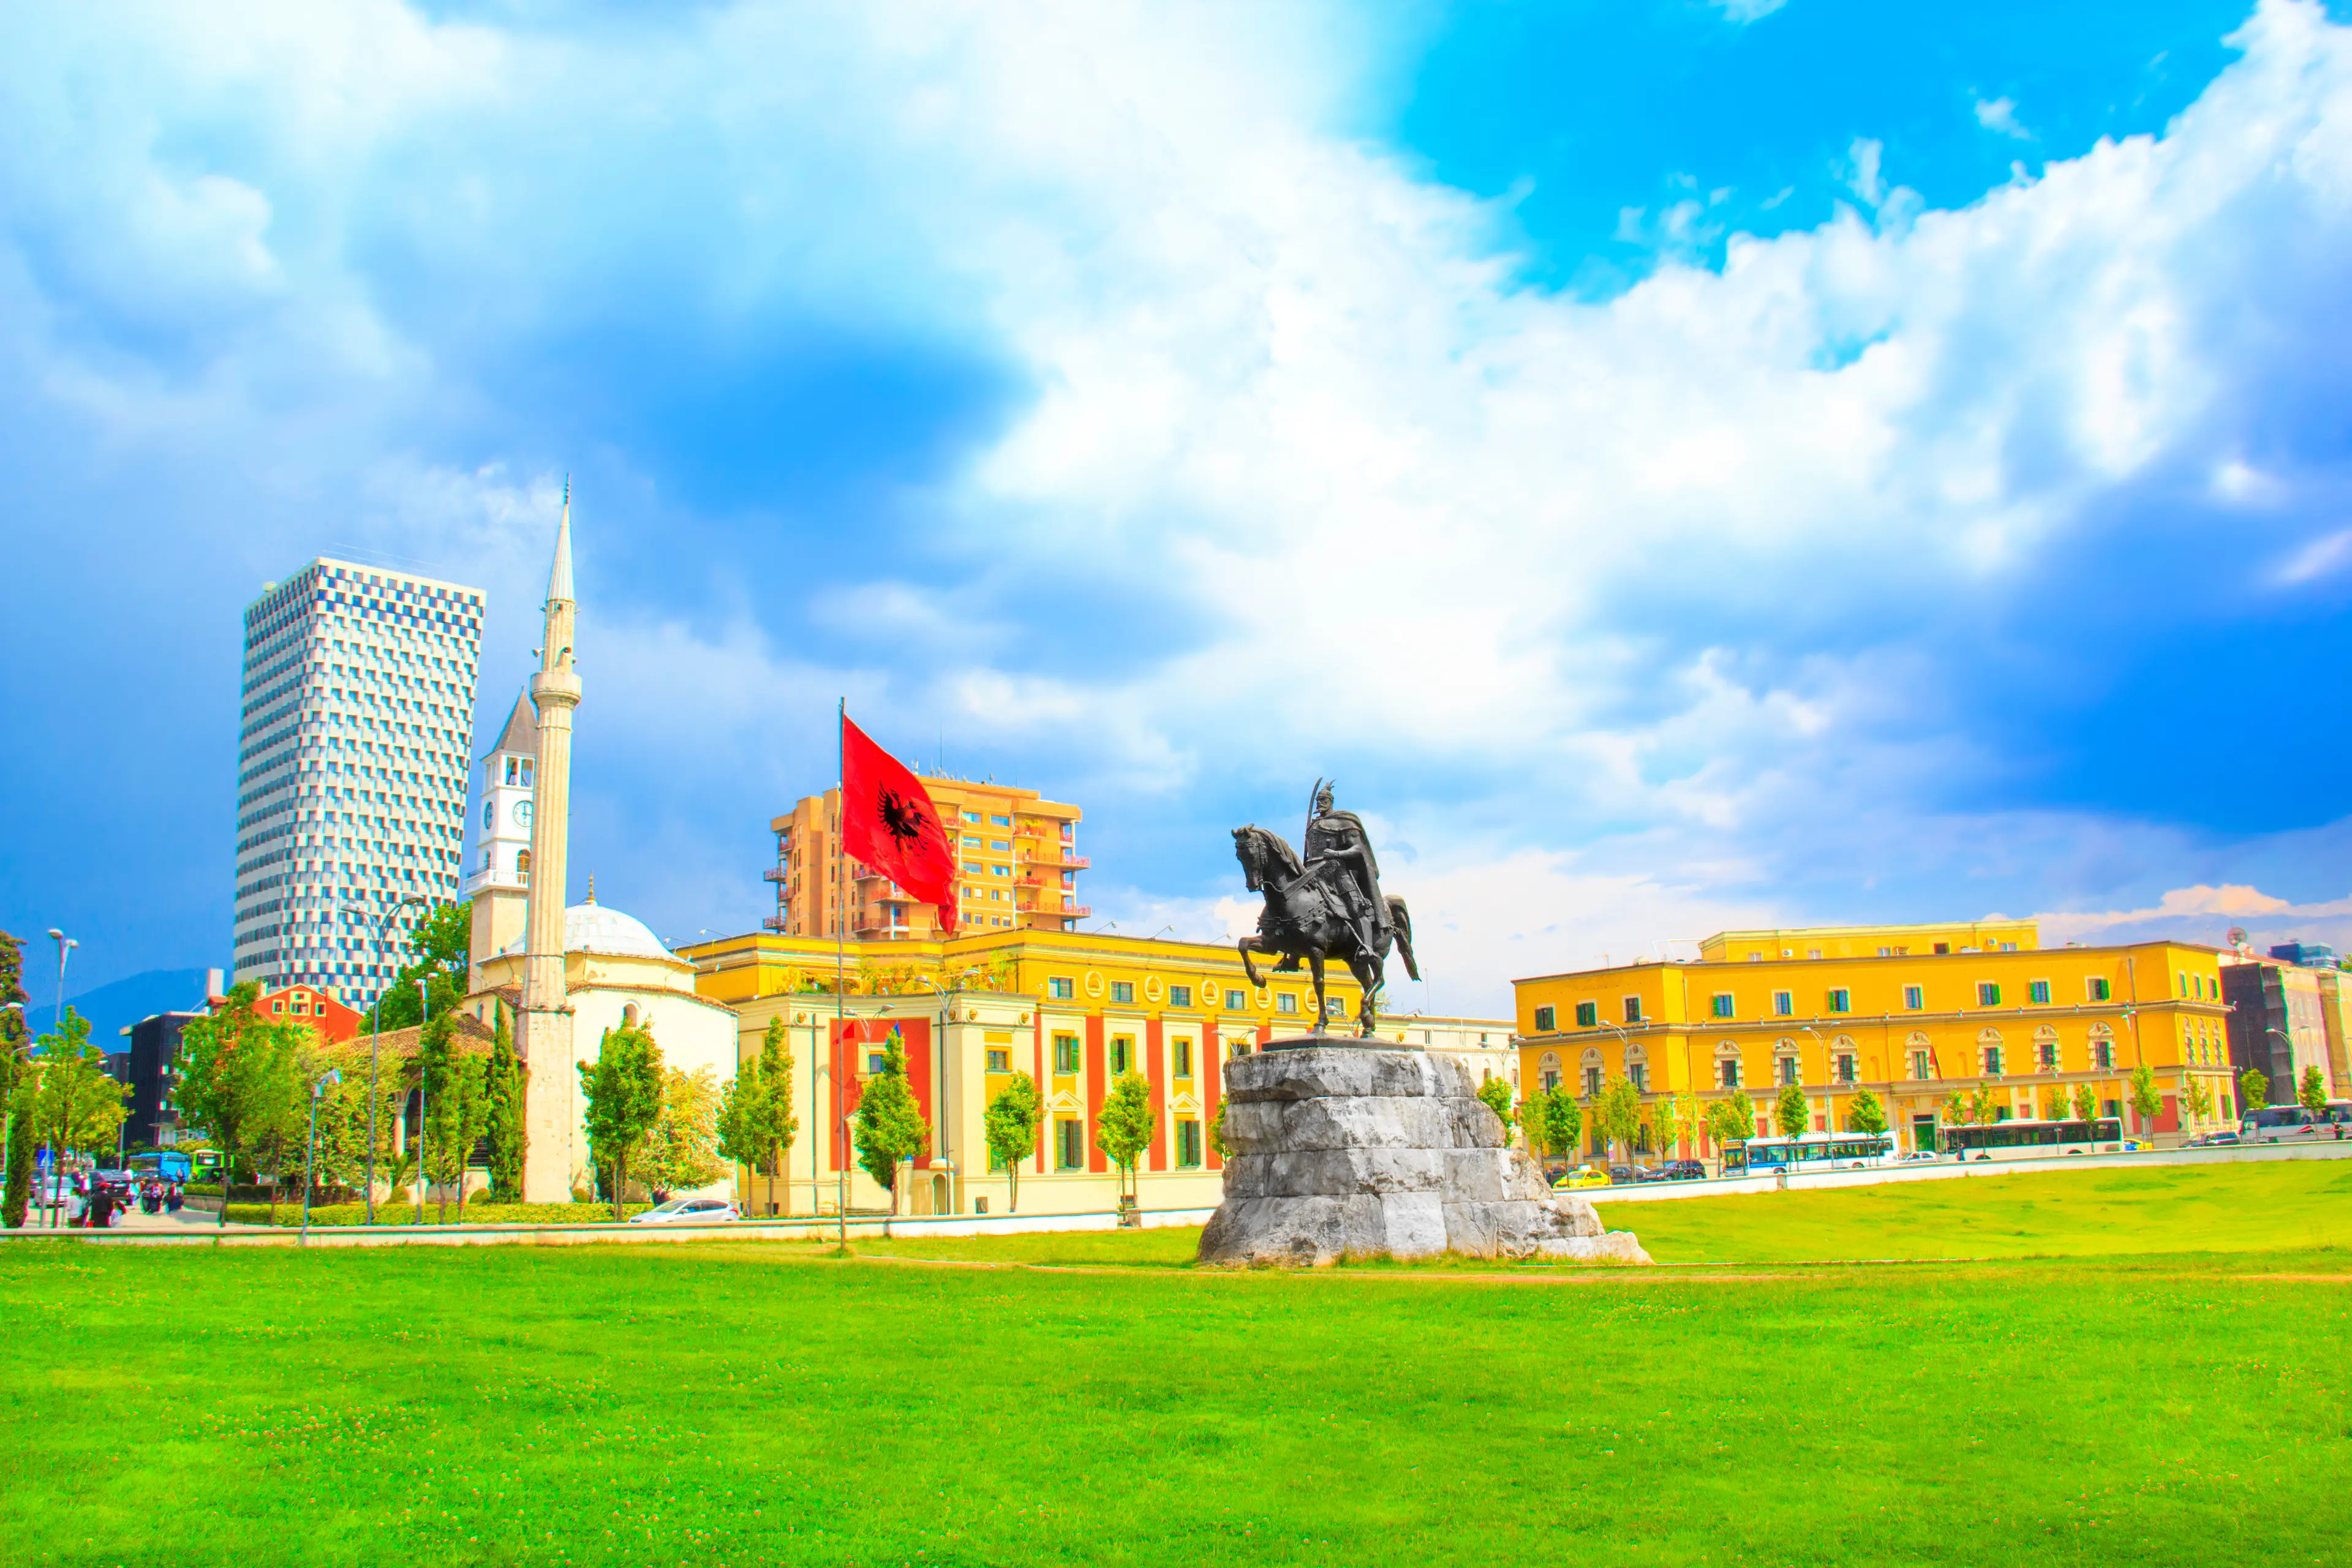 3-Day Local Tirana Adventure: Sightseeing & Outdoor Fun with Friends